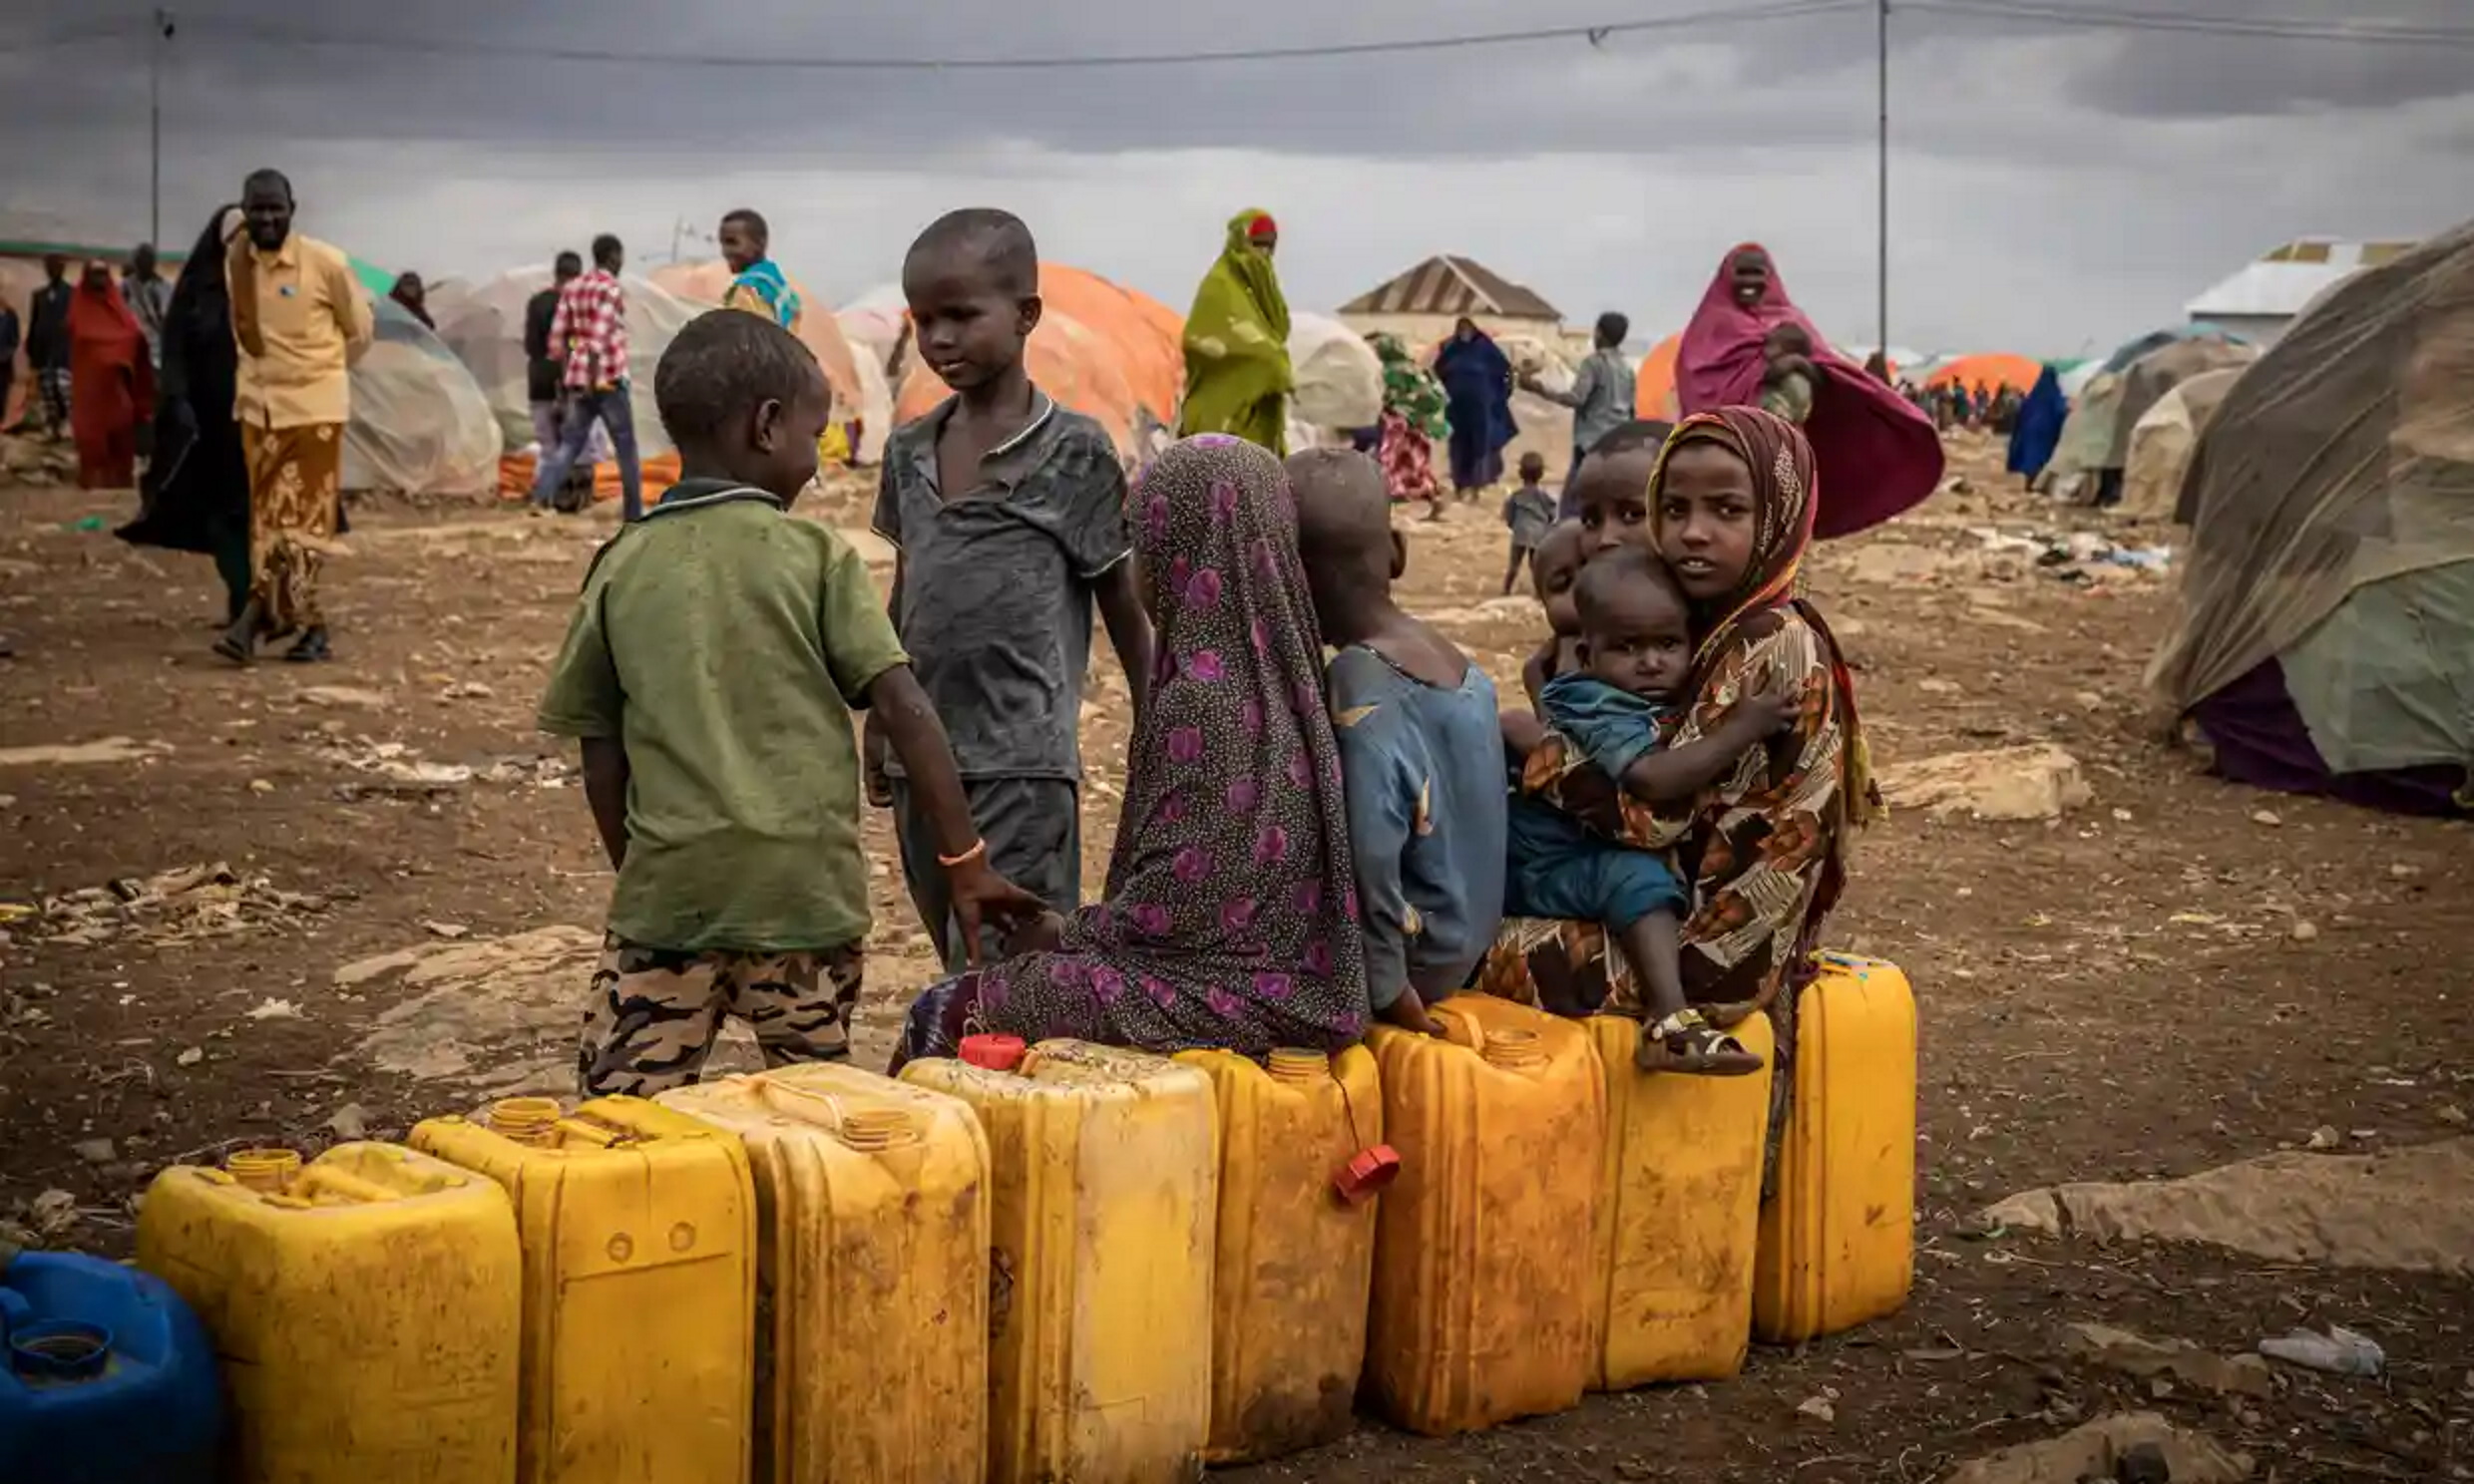 Children sit on water bottles waiting to be filled among tents in a displacement camp for people hit by drought in Baidoa, Somalia. Photo: Ed Ram / Getty